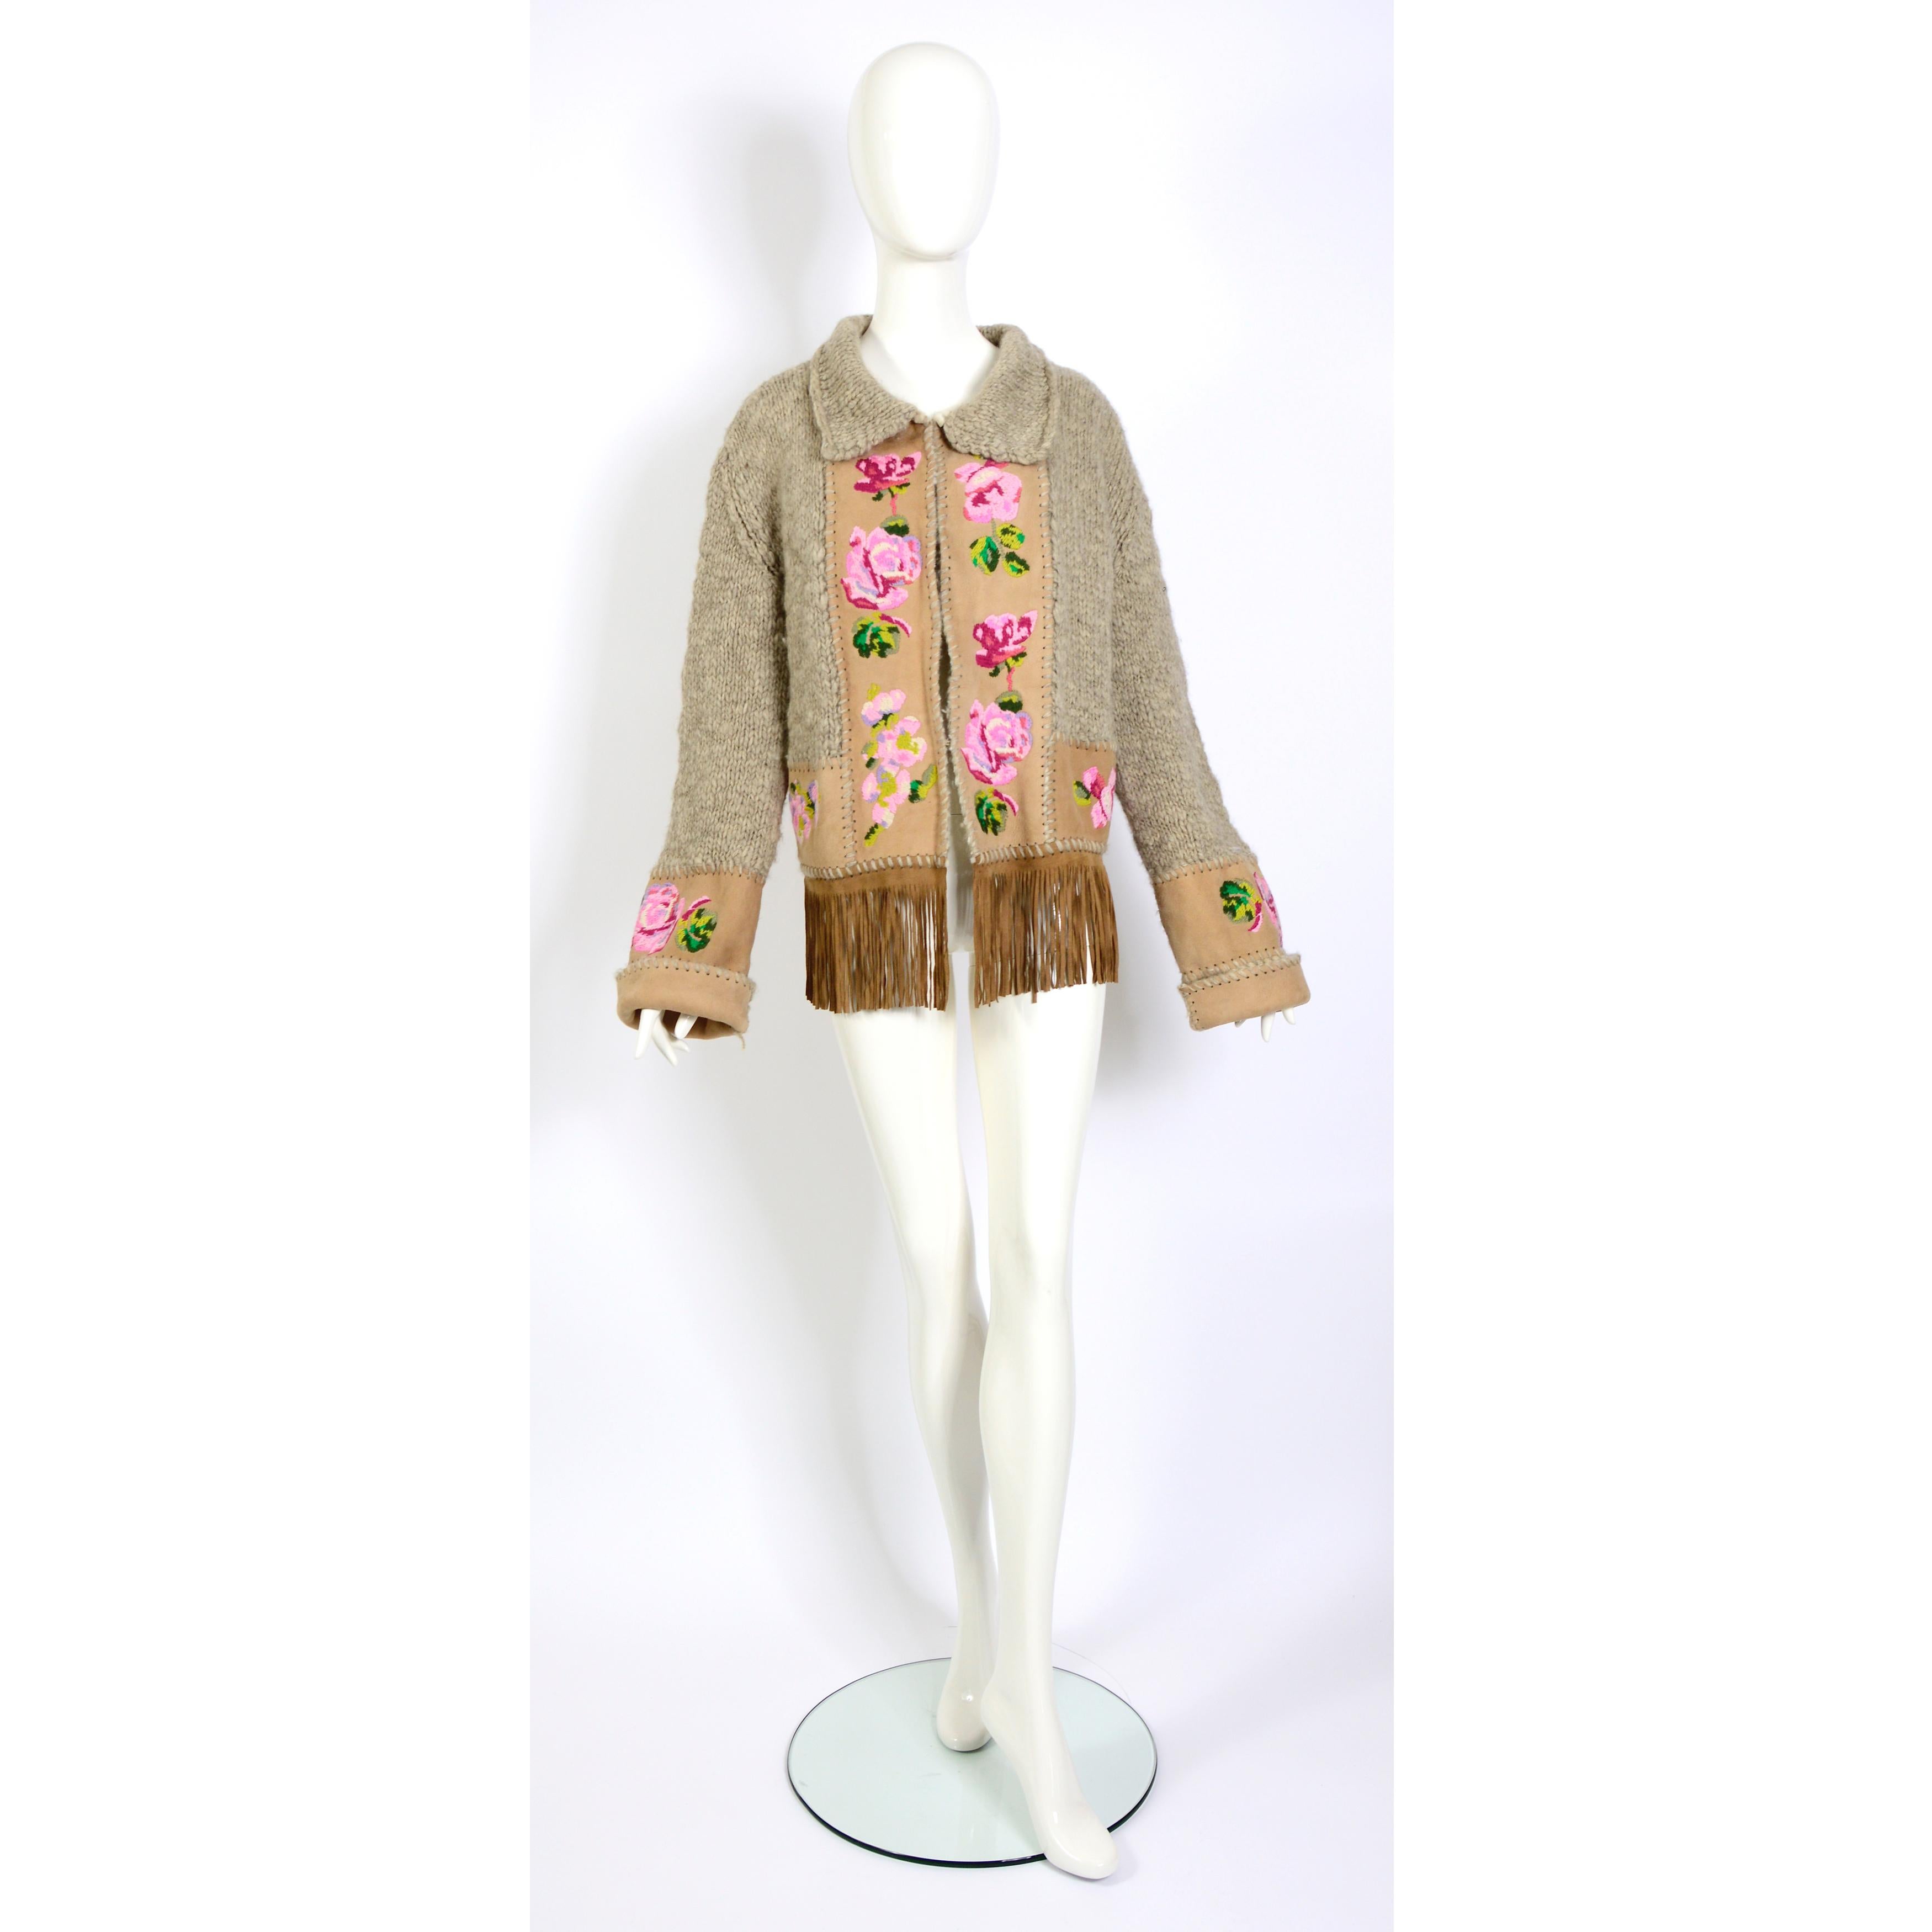 Christian Dior by John Galliano vintage fall 2000 embroidered fringed cardigan   For Sale 1